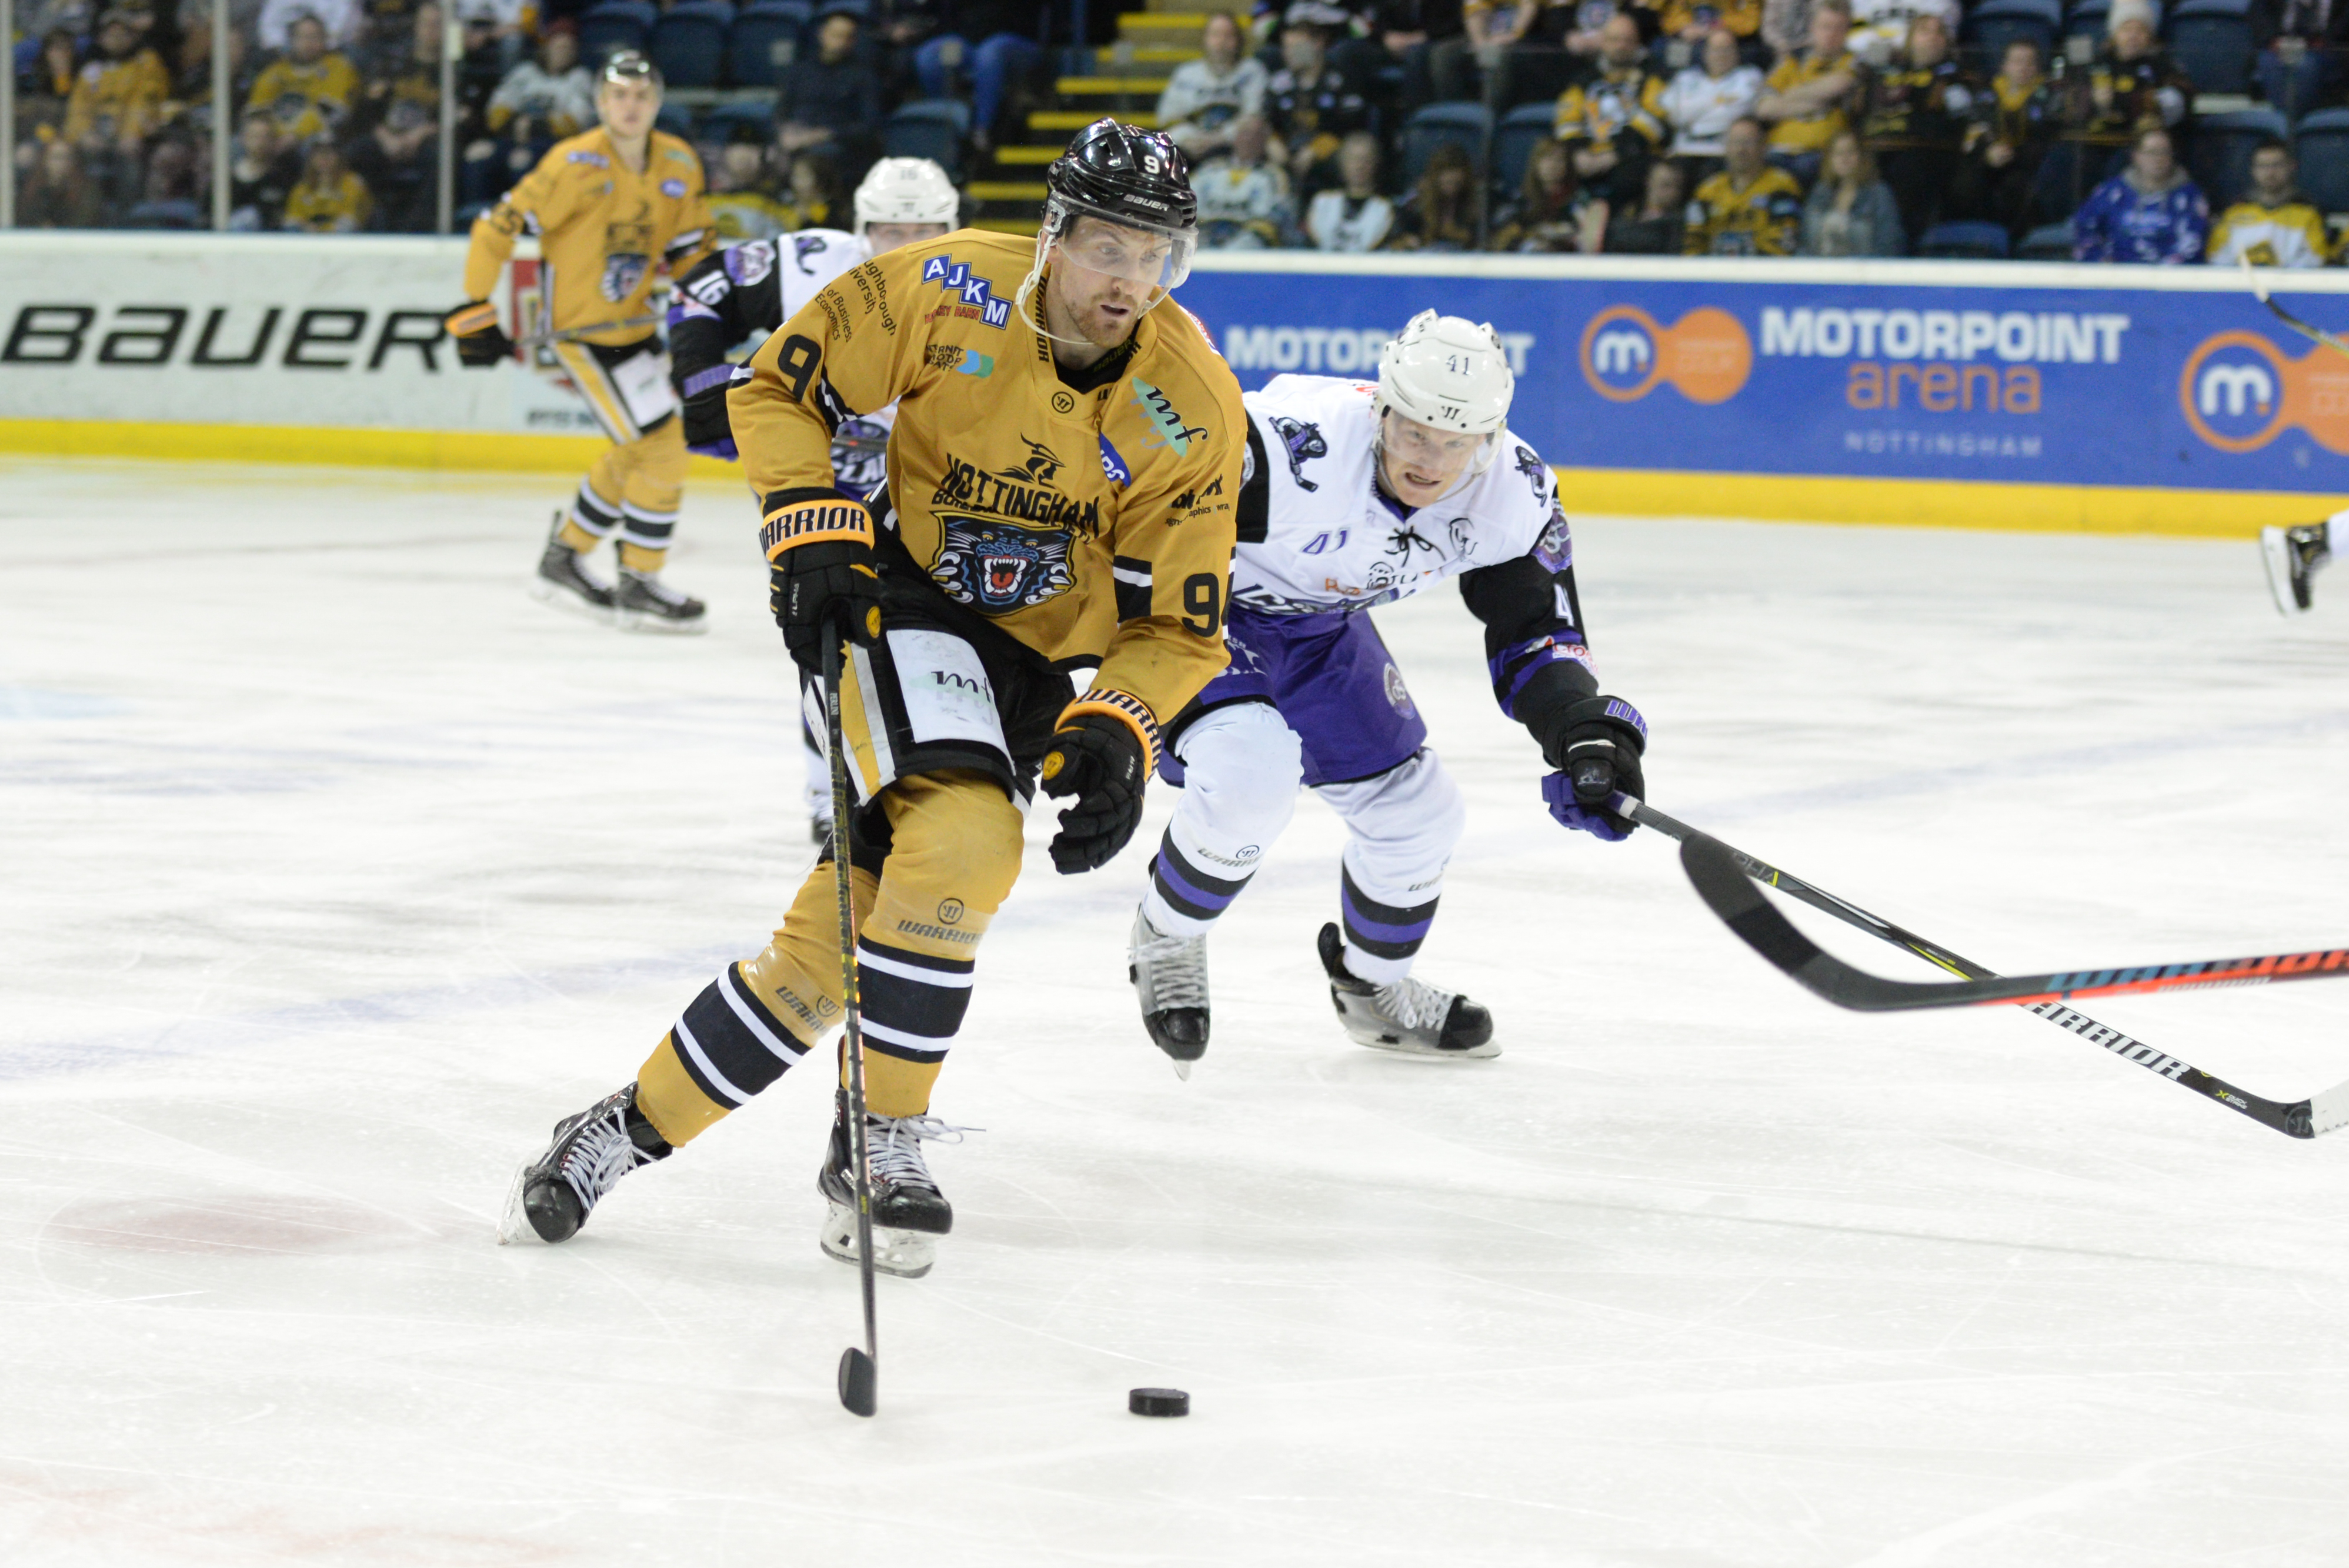 Highlights: Panthers vs Clan - 23/02/19 Top Image